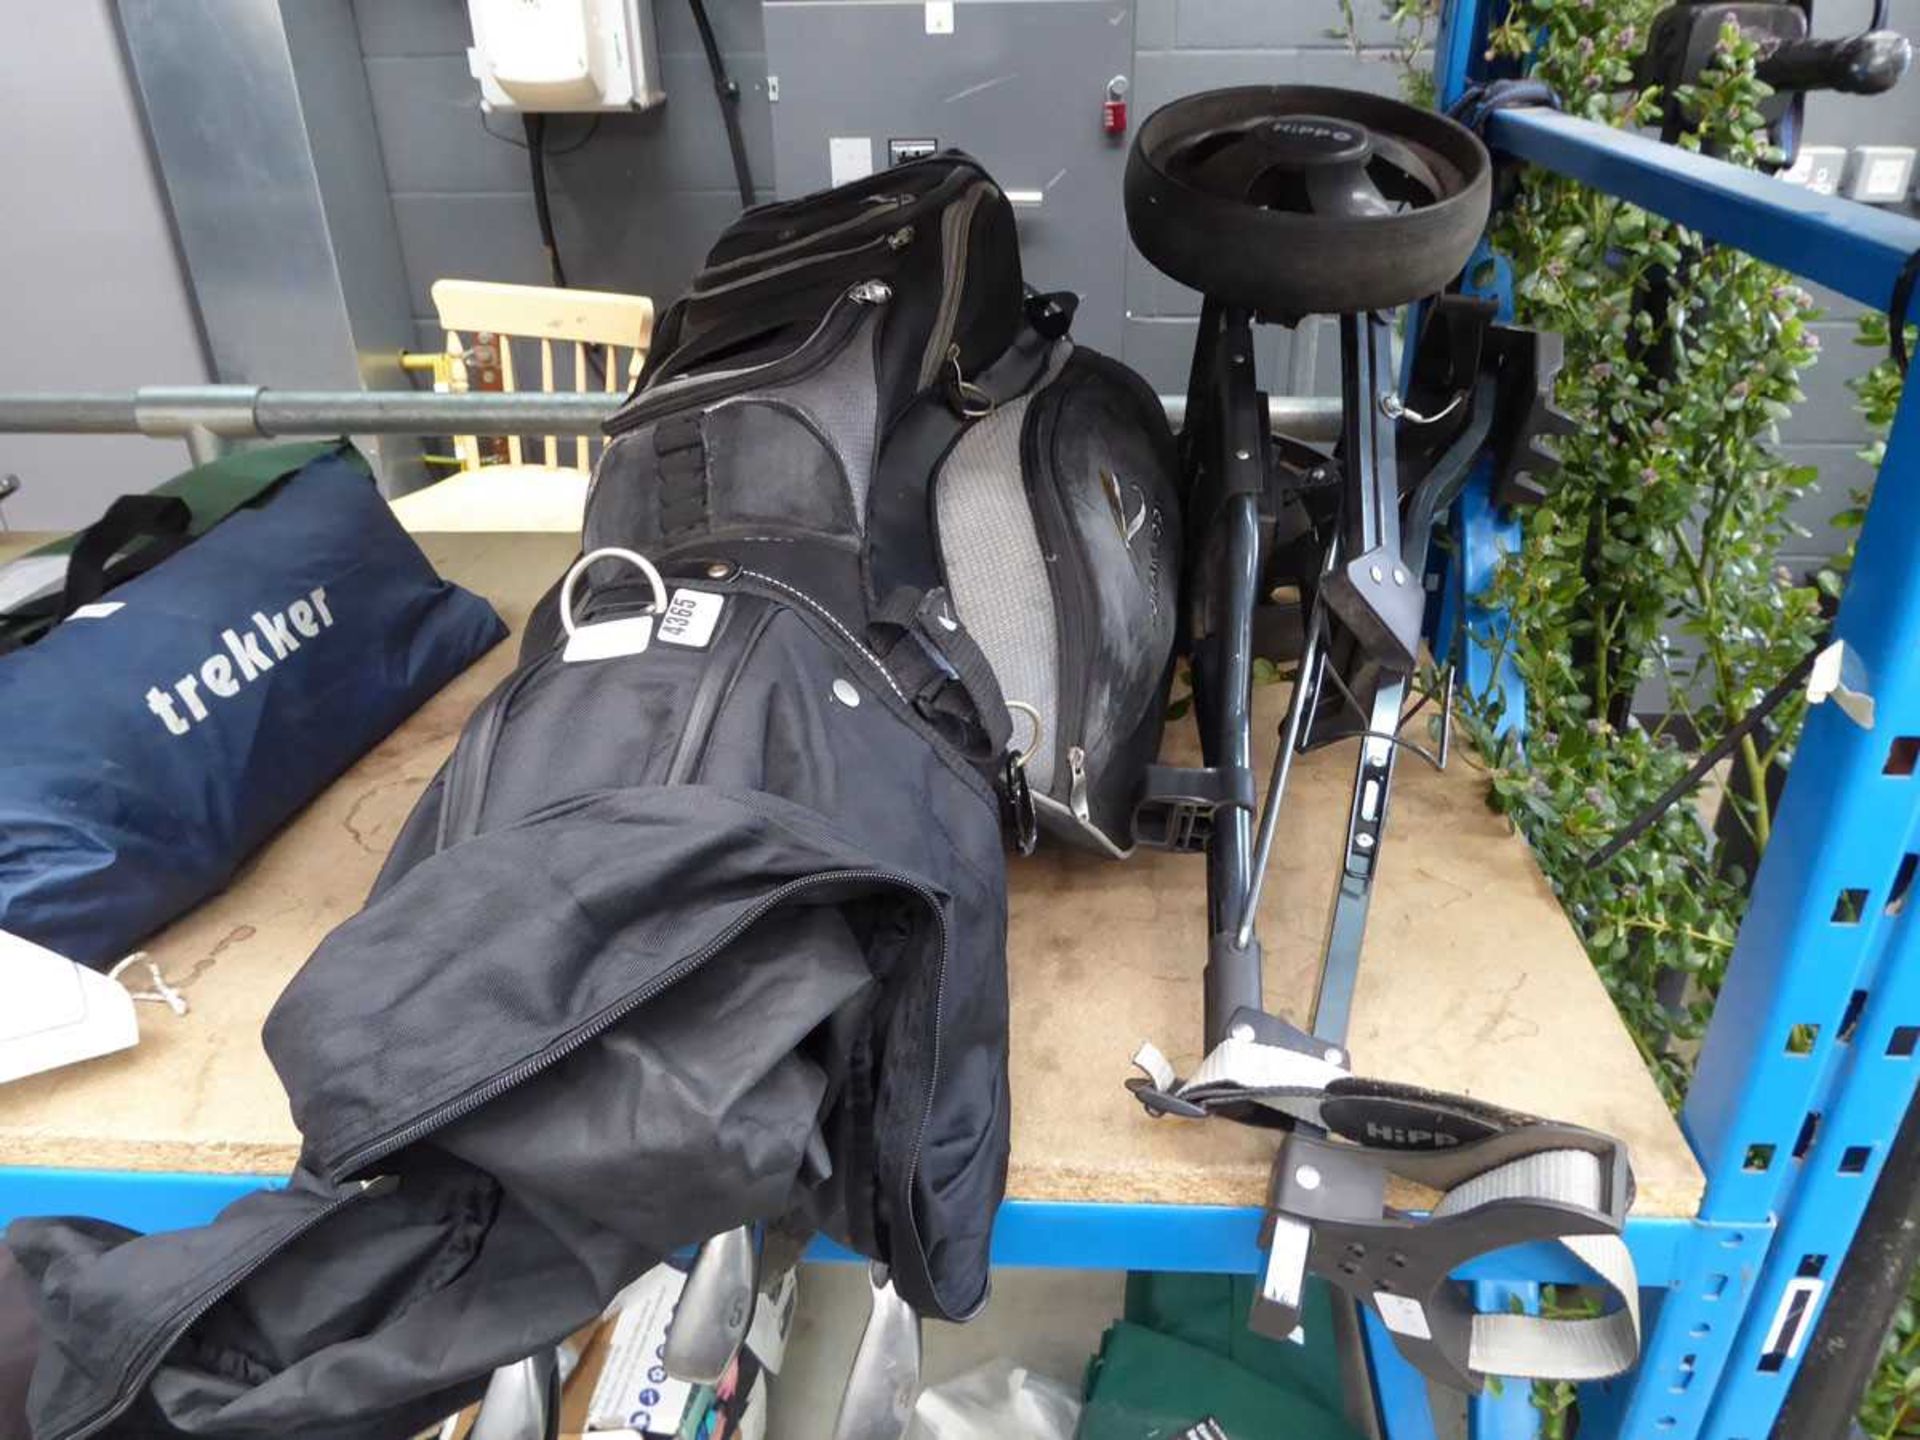 Power Caddy golf bag with assorted clubs and a folding trolley